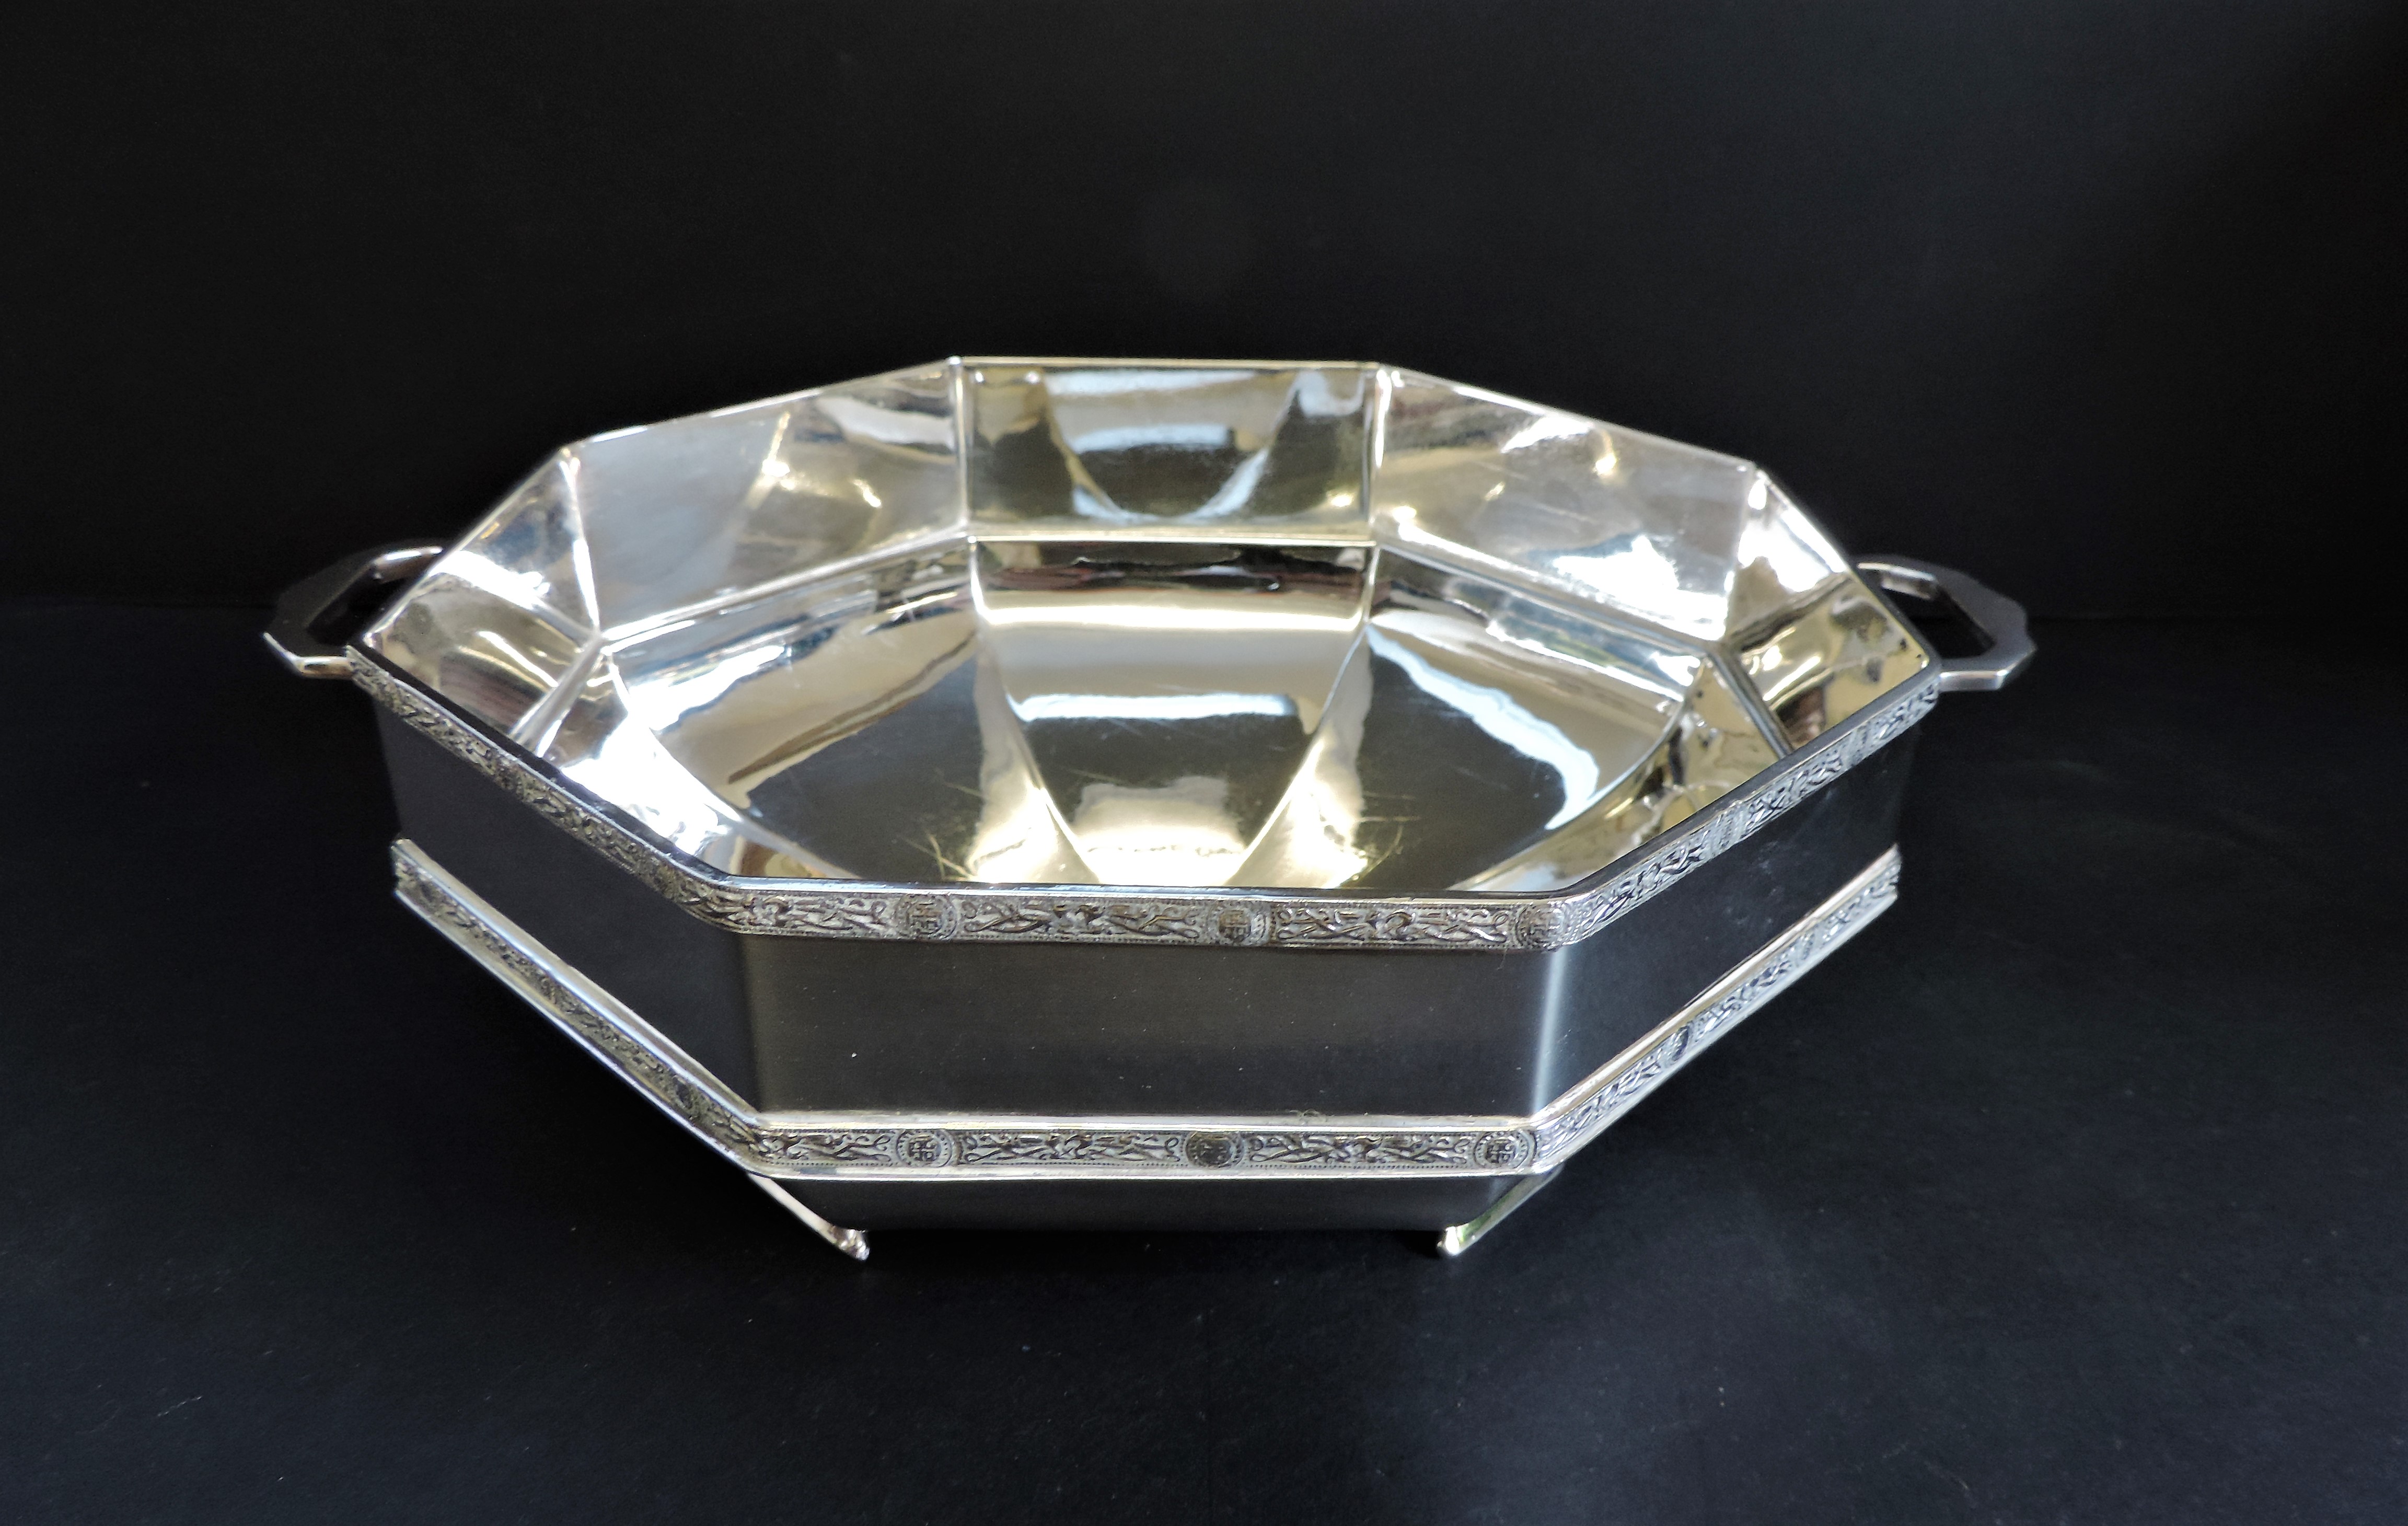 Antique Art Deco Silver Plated Octagonal Bowl 30cm Wide - Image 3 of 6